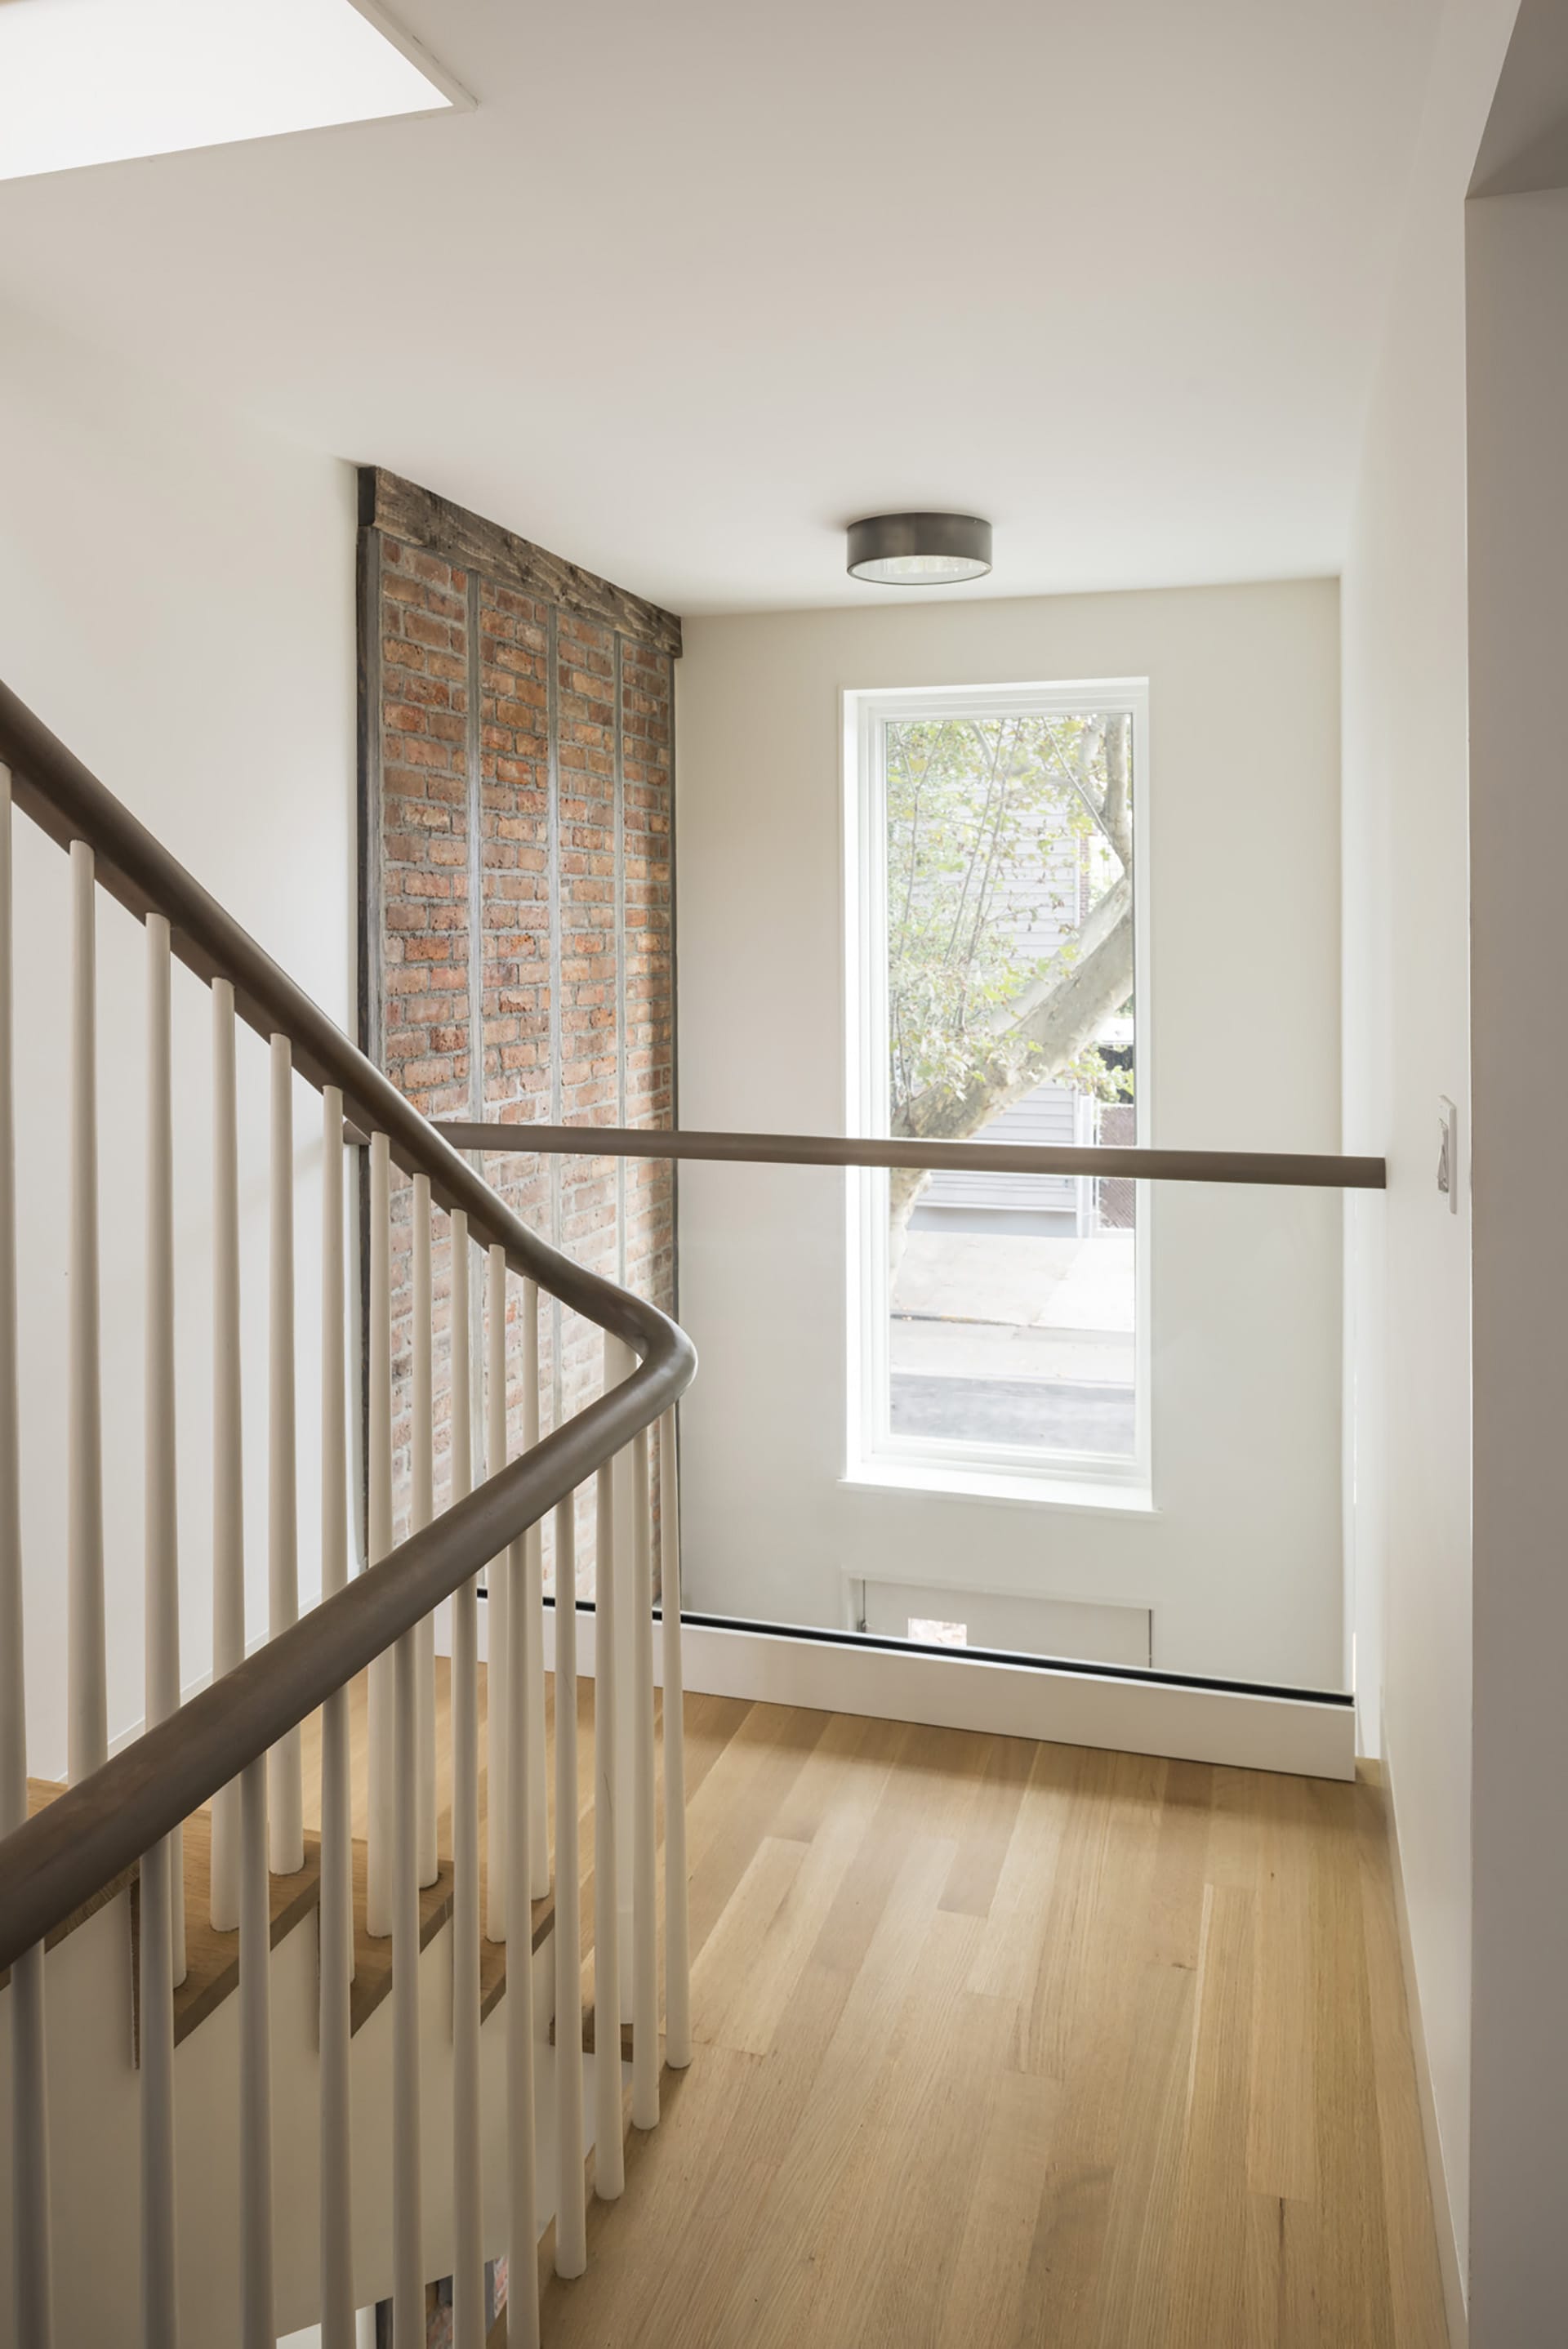 Stair hallway and double height space at the front of a Greenpoint townhouse after renovation